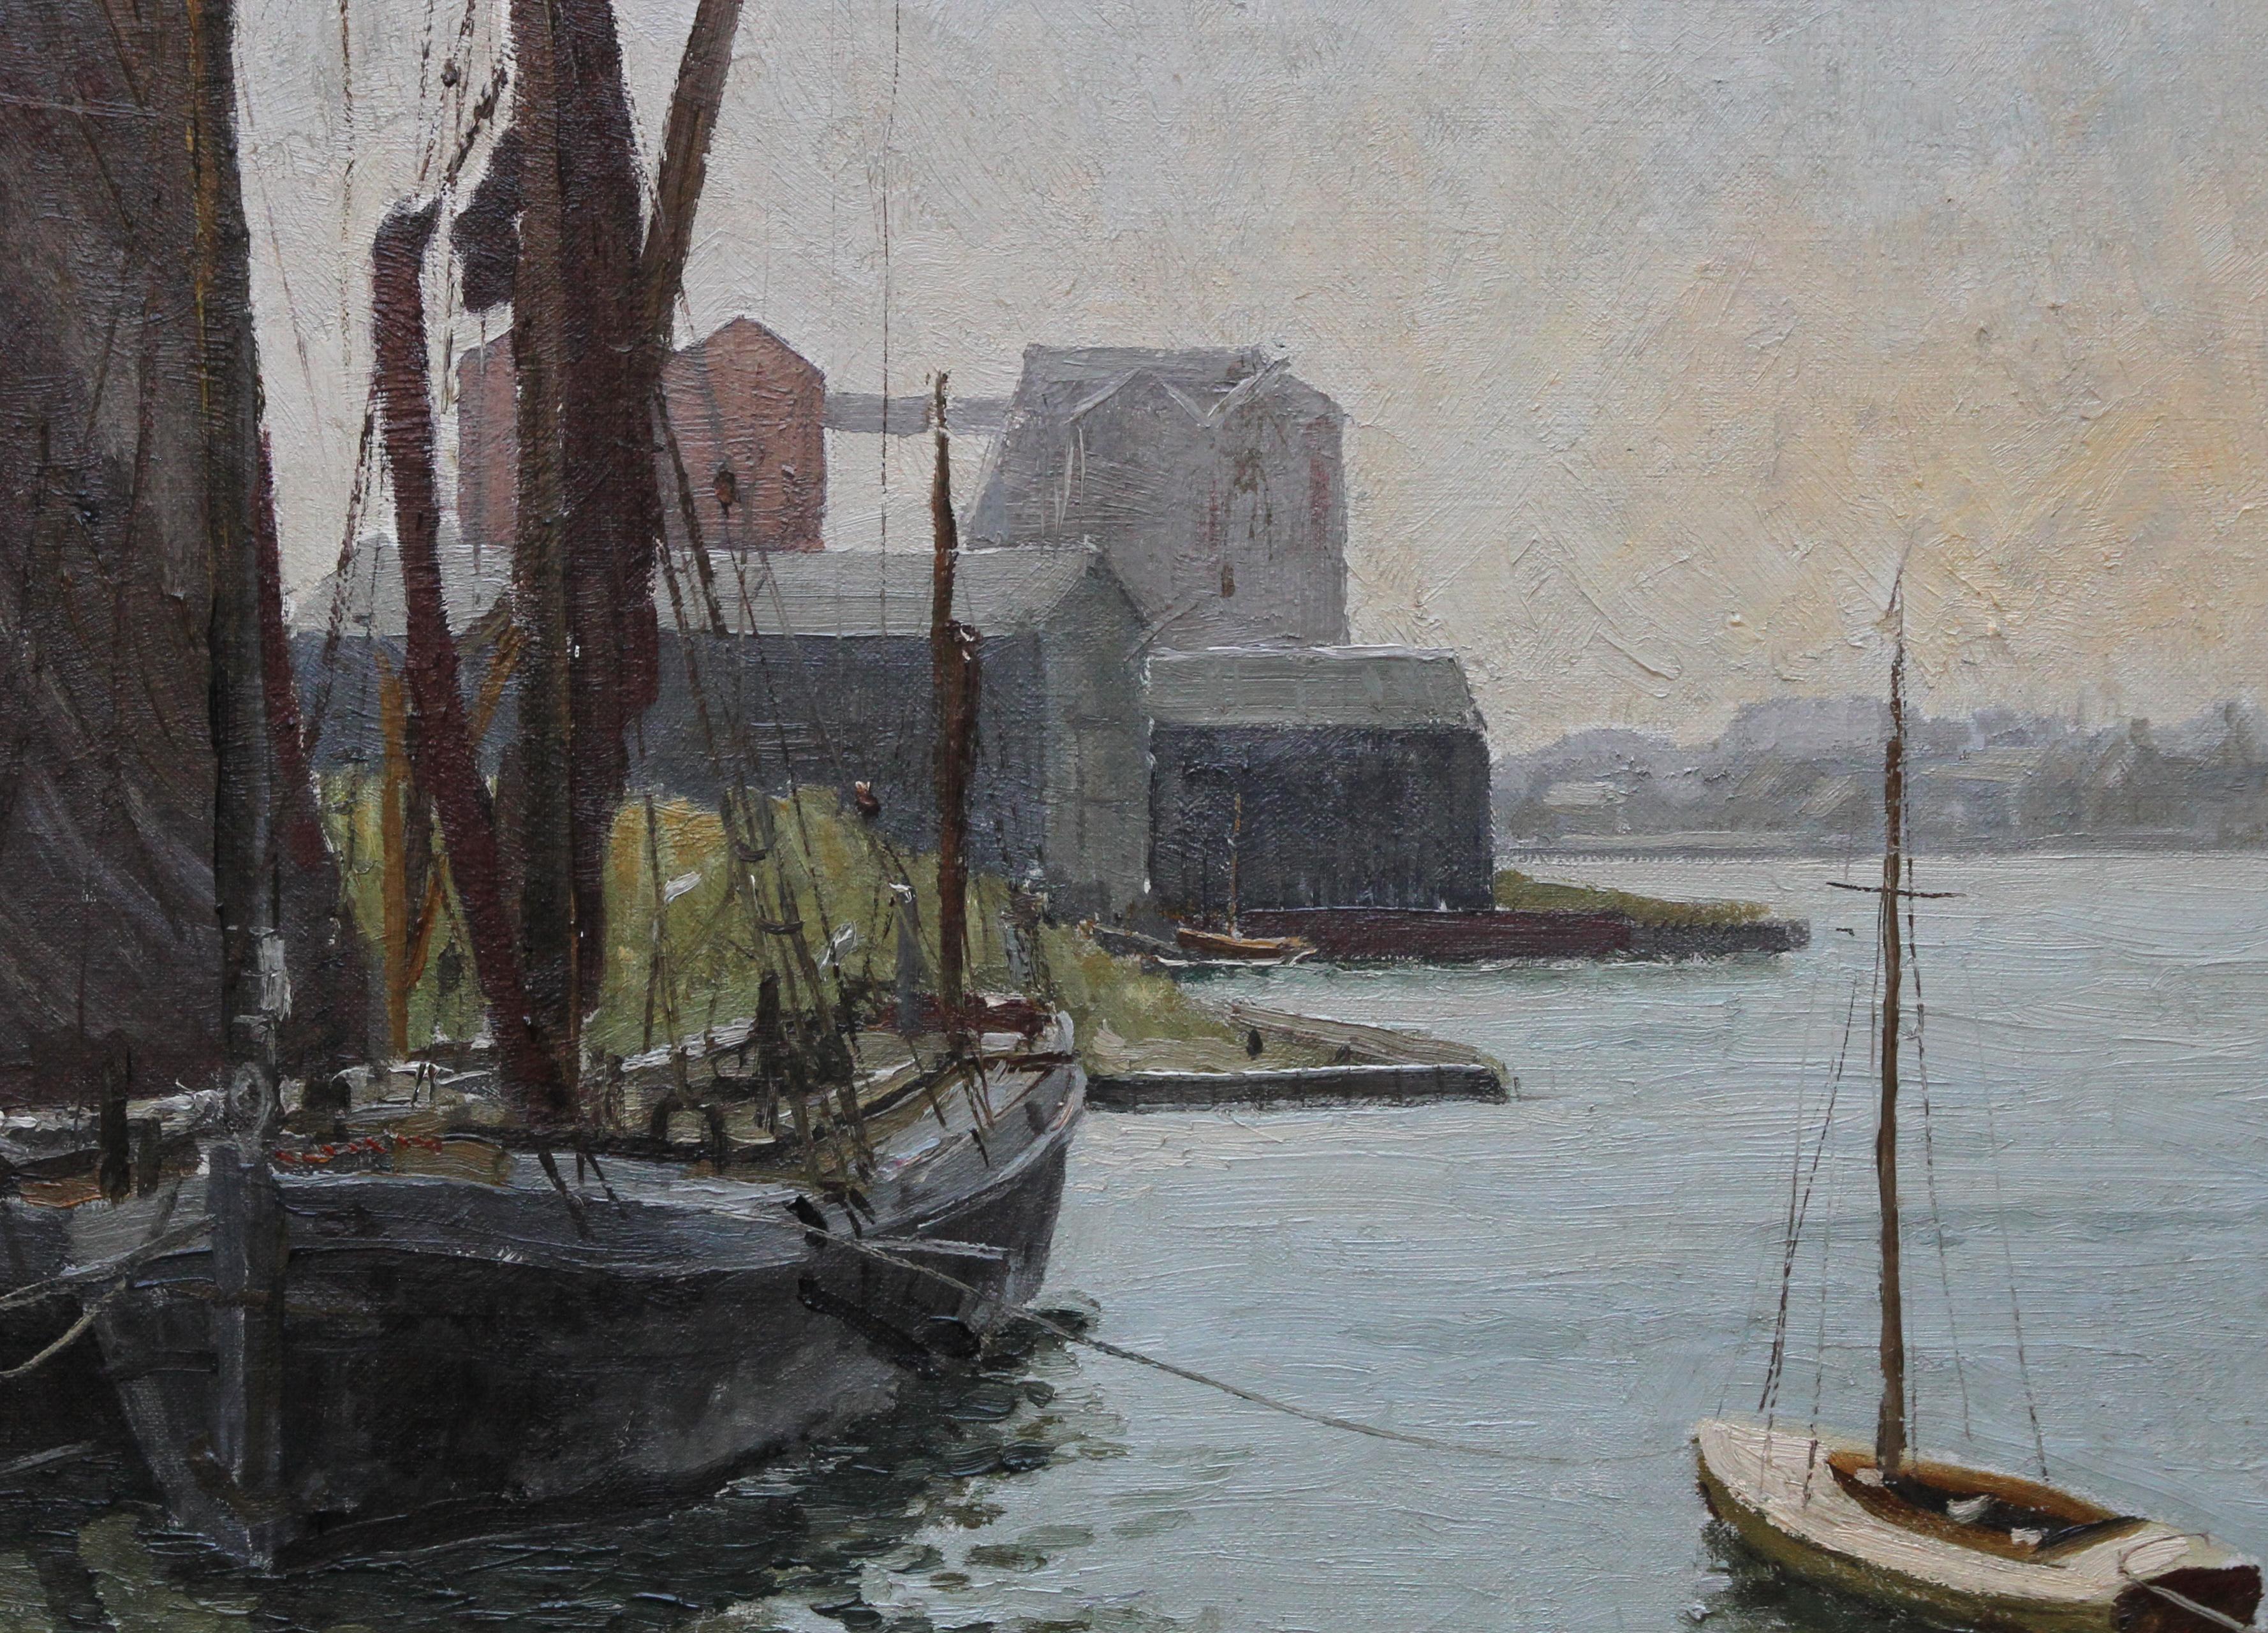 Abandoned Thames Barges at  Mistley - British 30's exhibited marine oil painting - Brown Landscape Painting by John Whitlock Codner